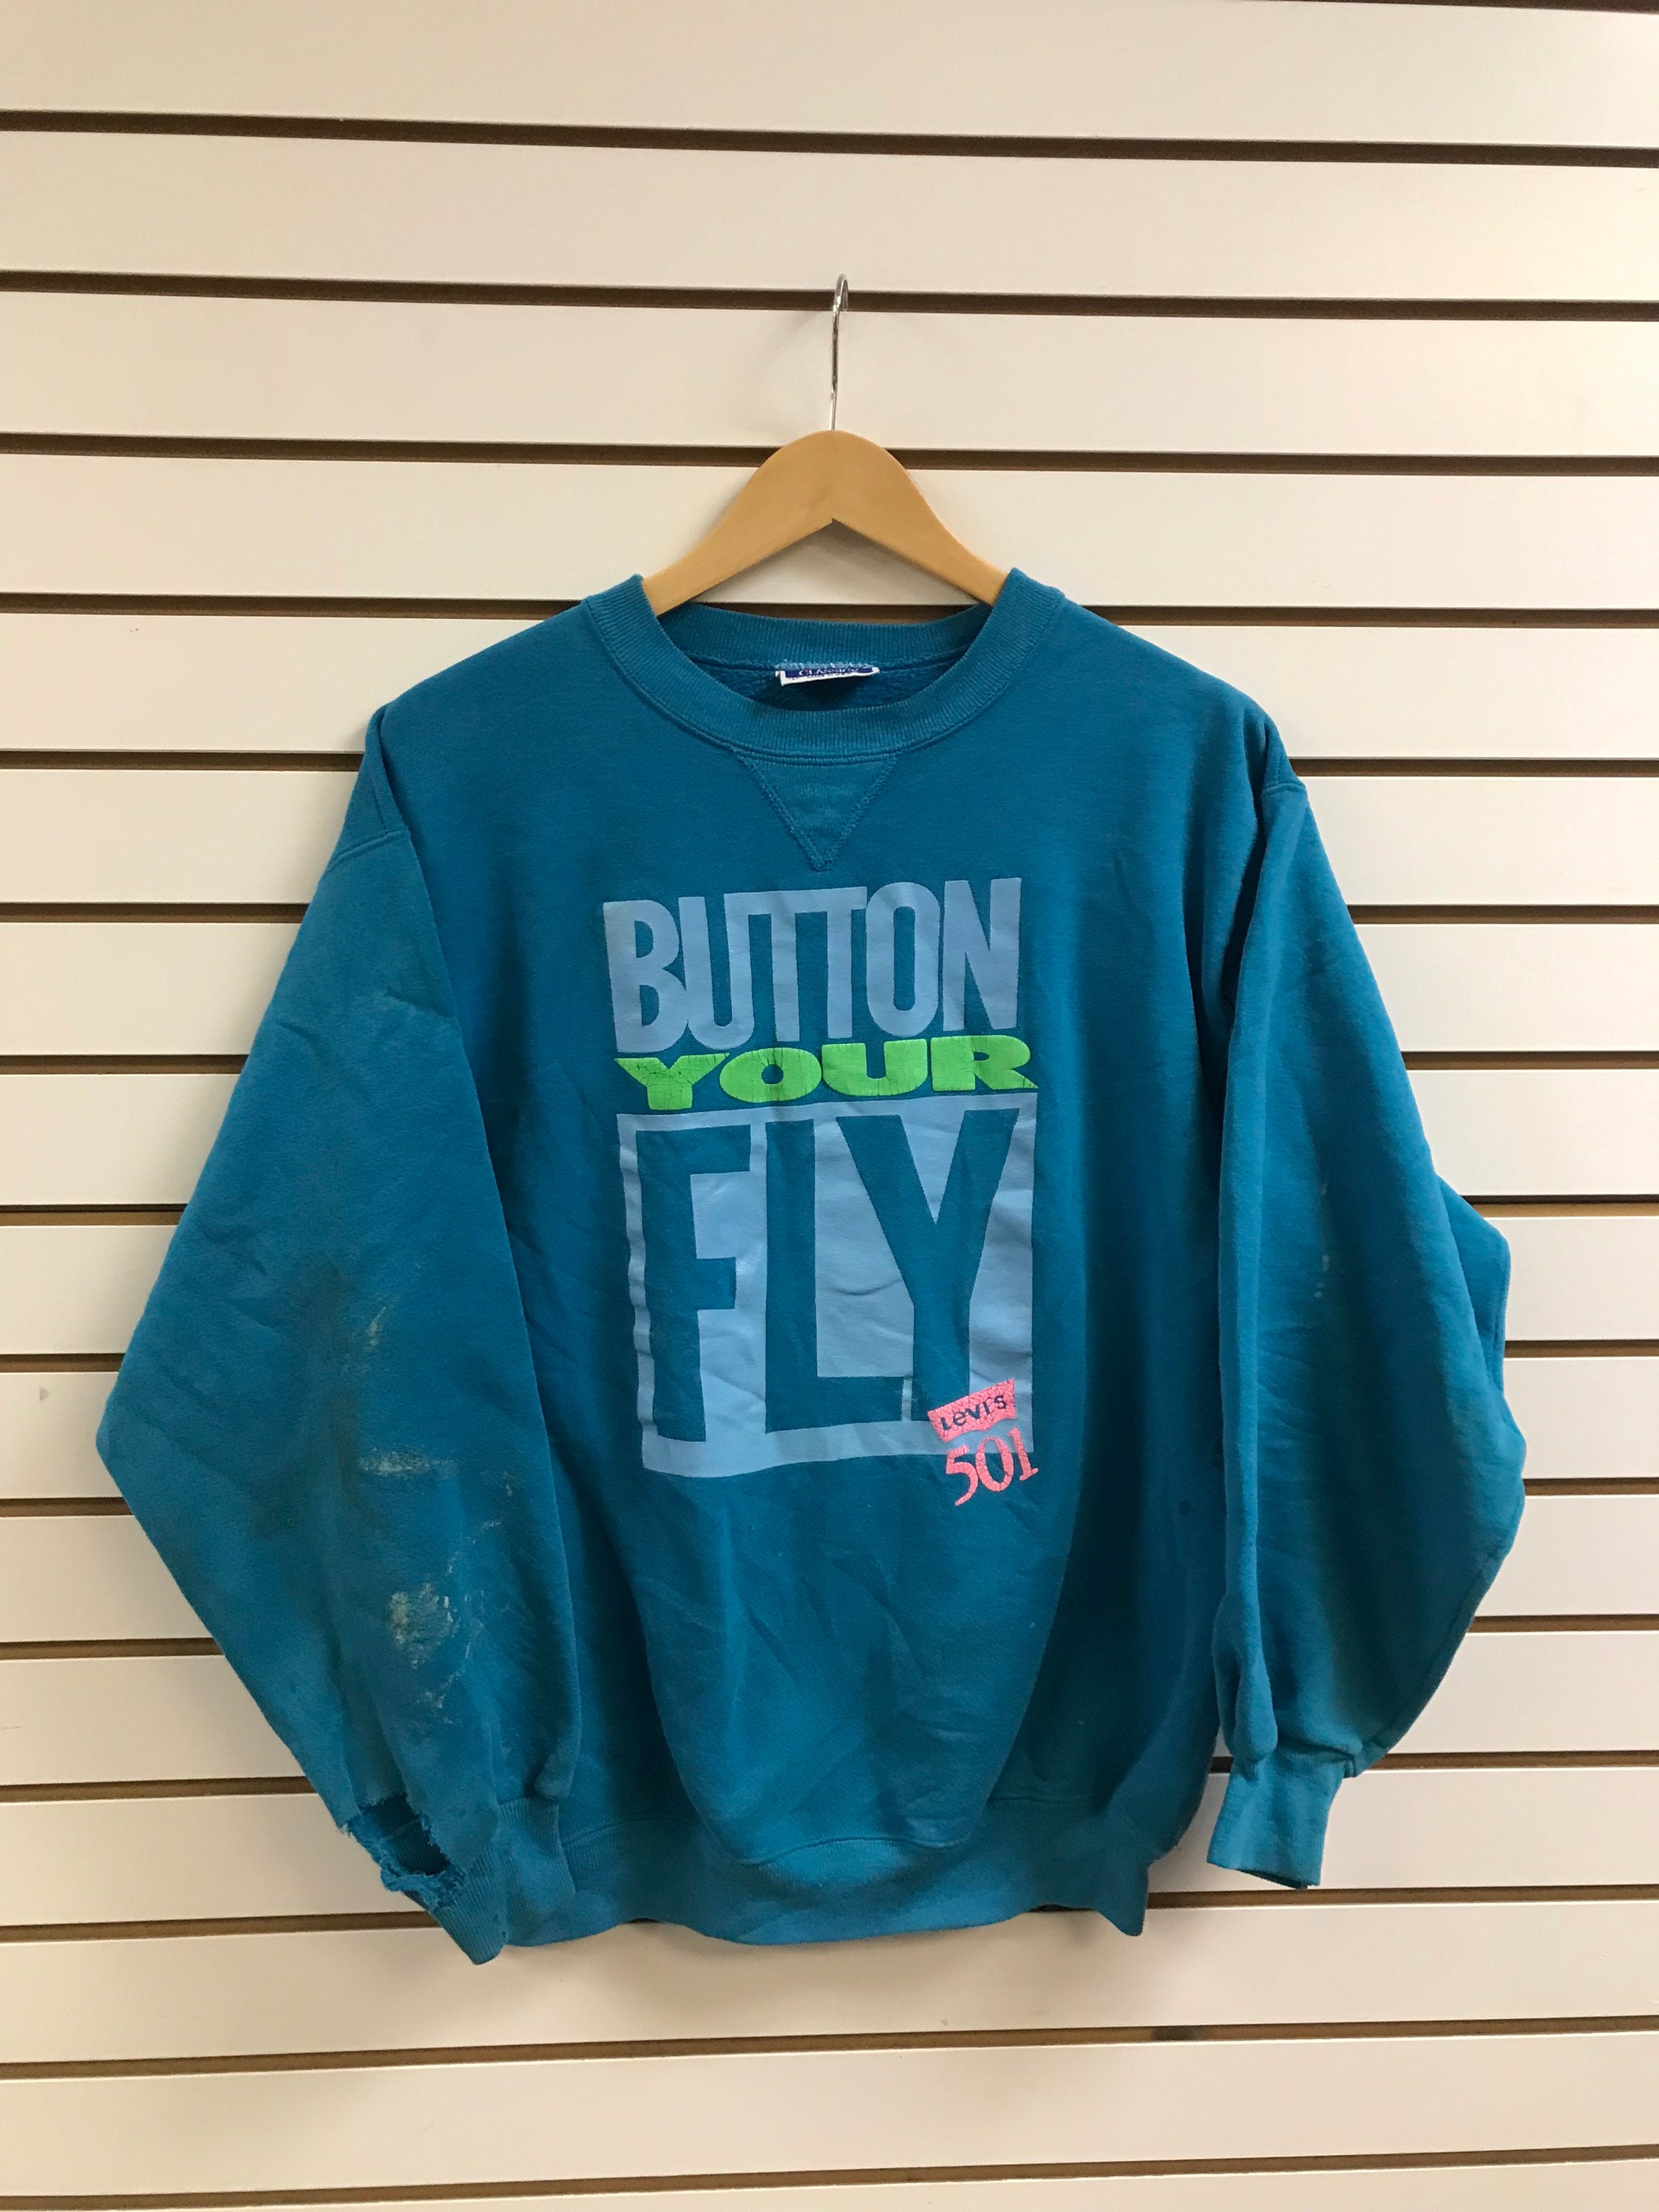 Vintage Levis Button Your Fly Sweatshirt Size Large 1990s - Etsy